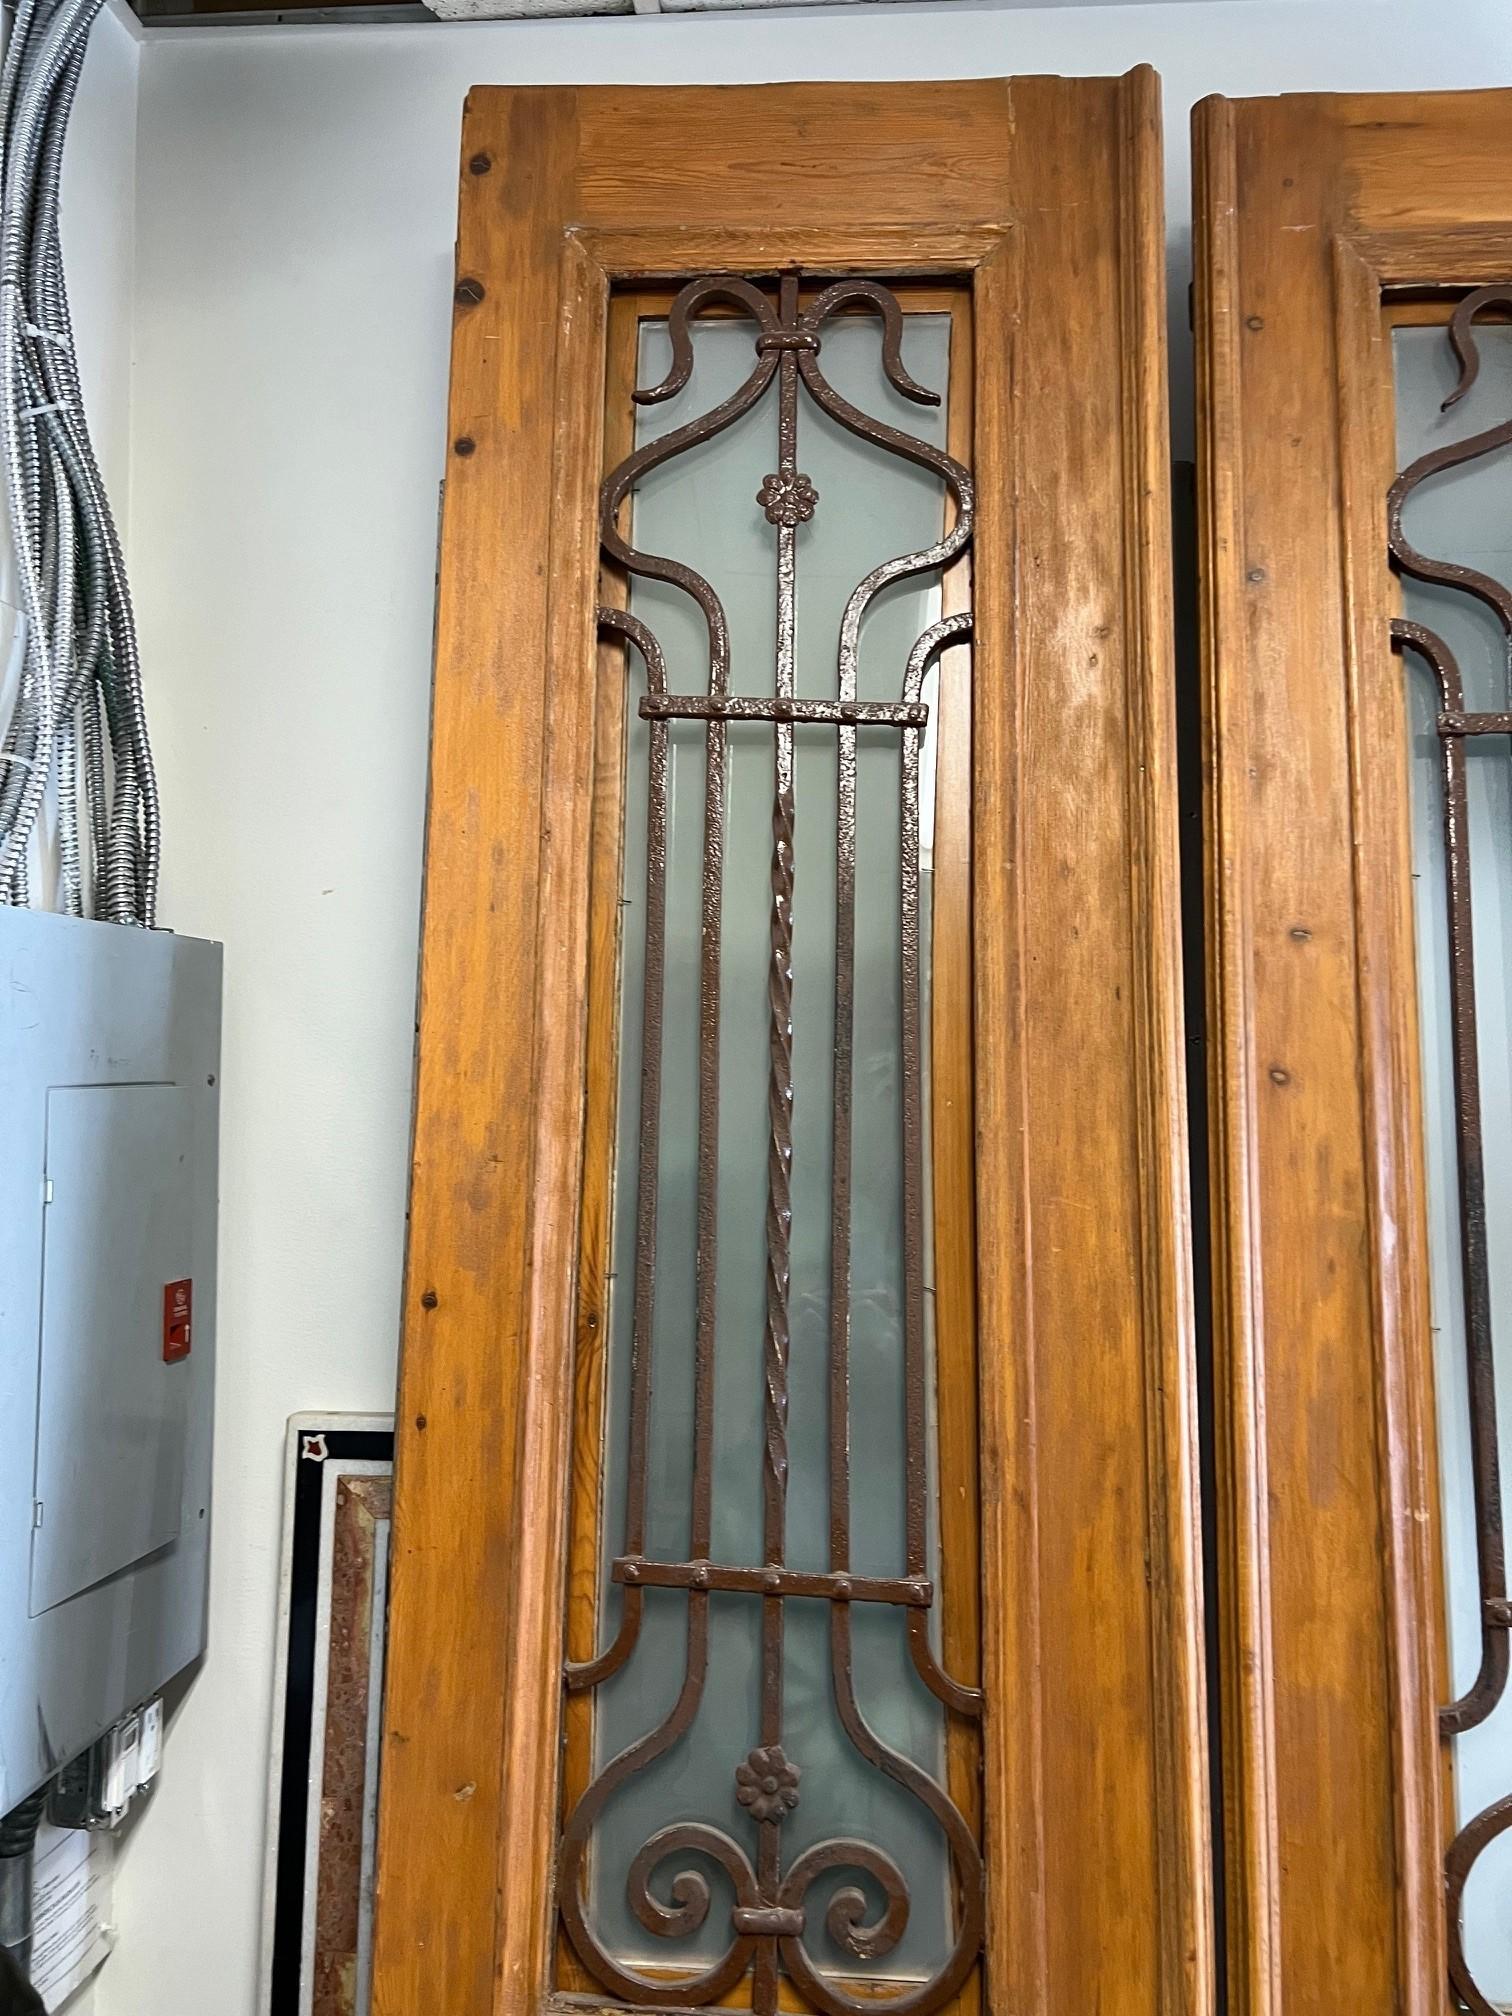 This is a great pair of antique doors wood with decorative iron panels. The pair was imported from Egypt and were produced at a time in the early 1900s when French architecture and style had a great influence on the Egyptian culture, especially in